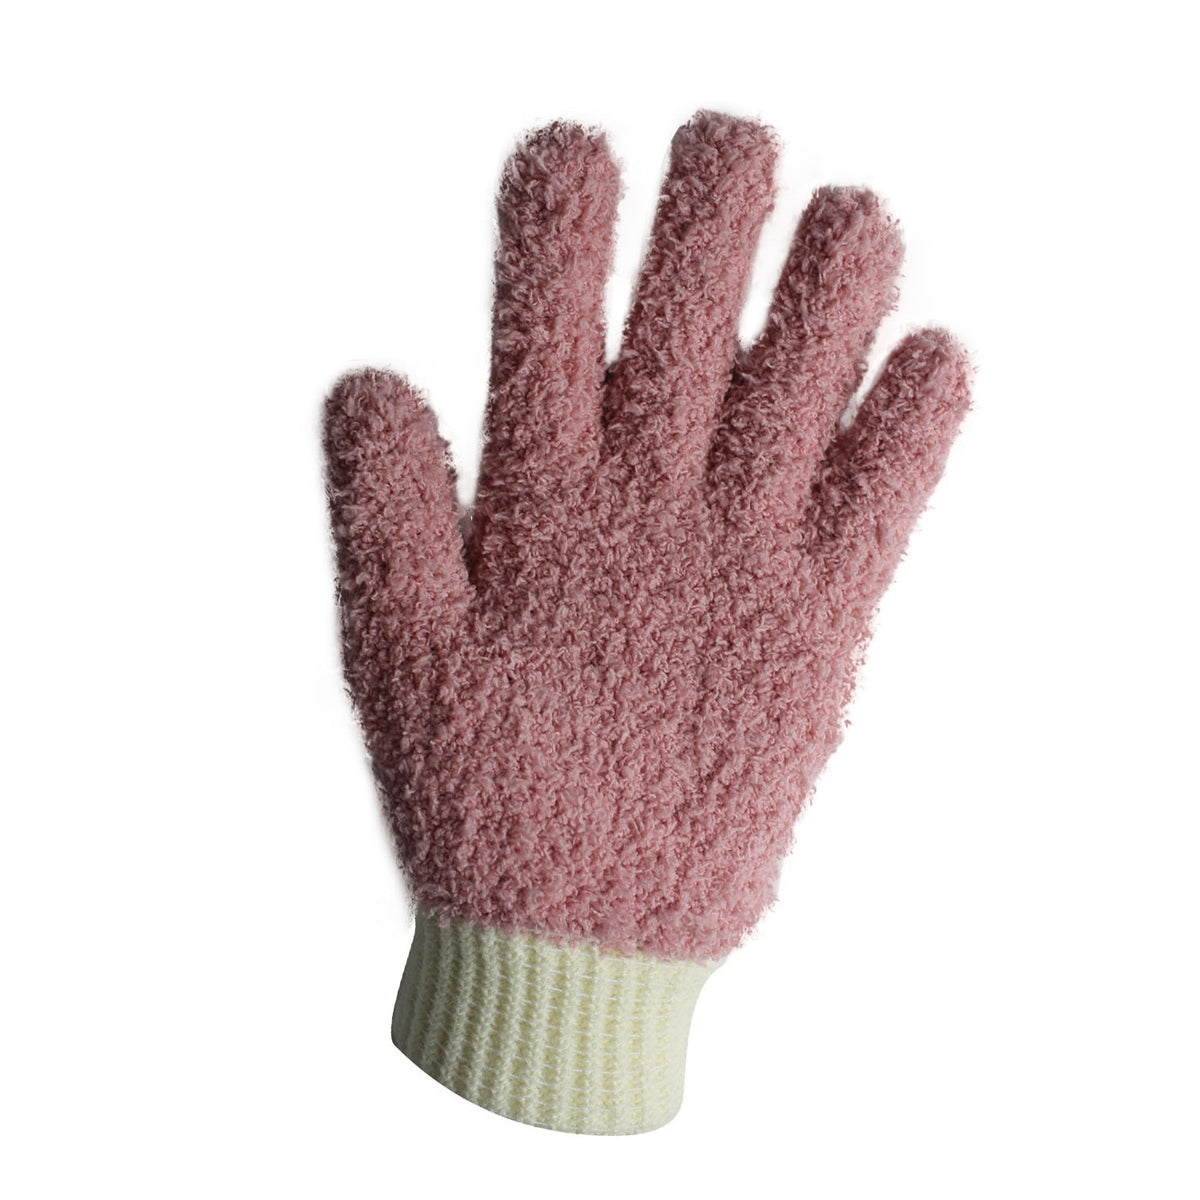 TidyUps 4 PC Microfiber Dusting Gloves & Glass Cleaning Mitts ,Yellow